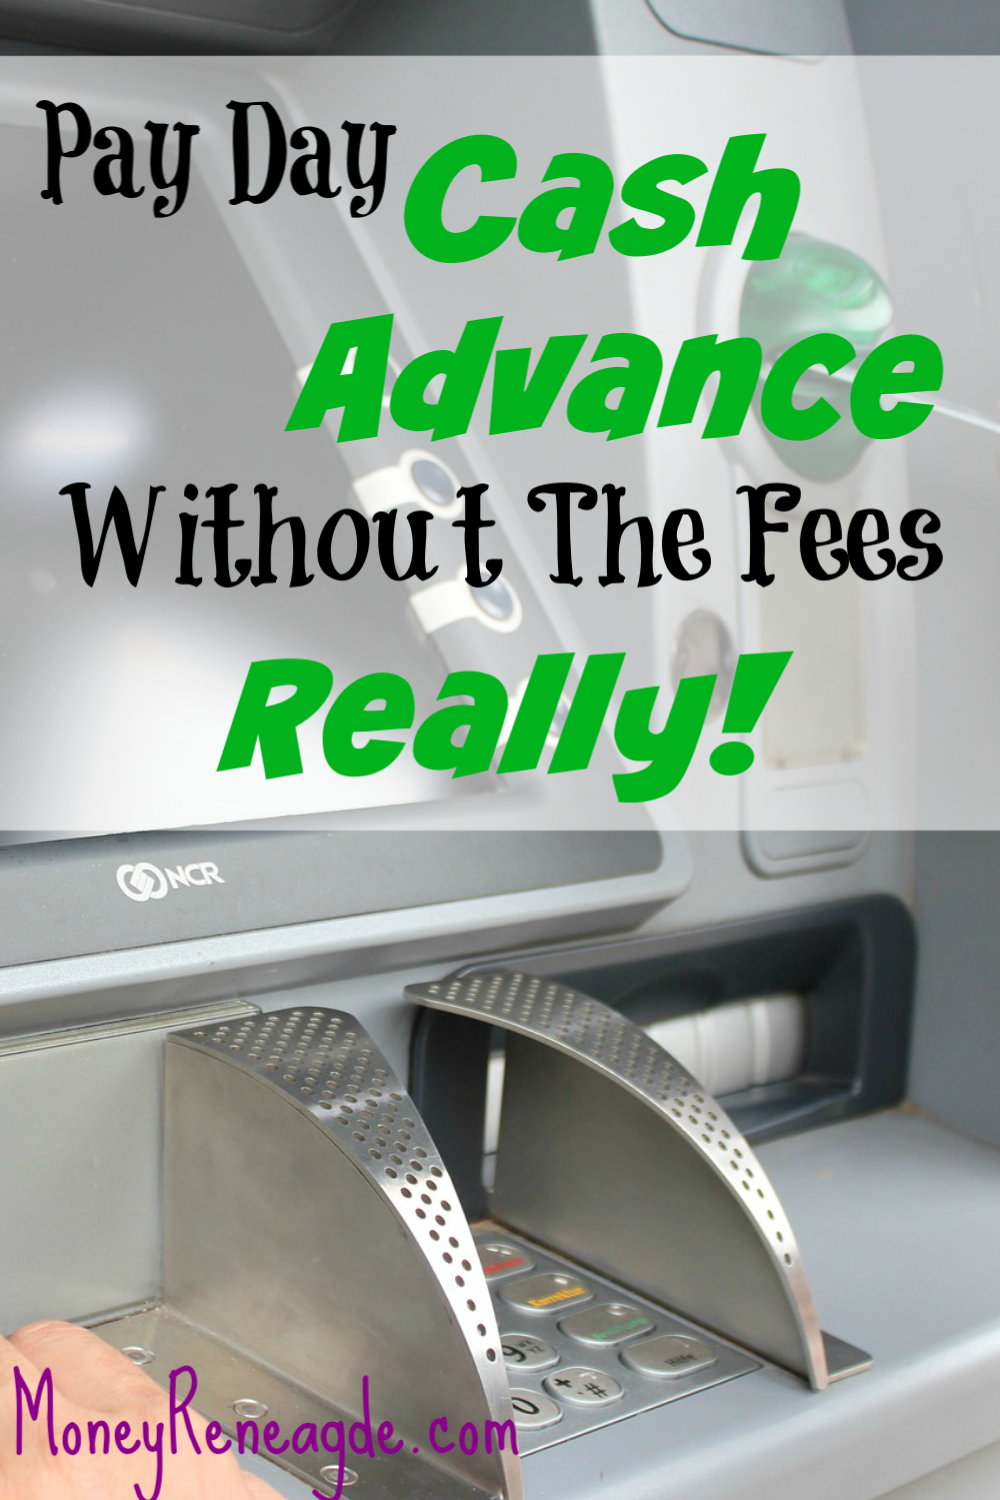 payday cash advance without fees